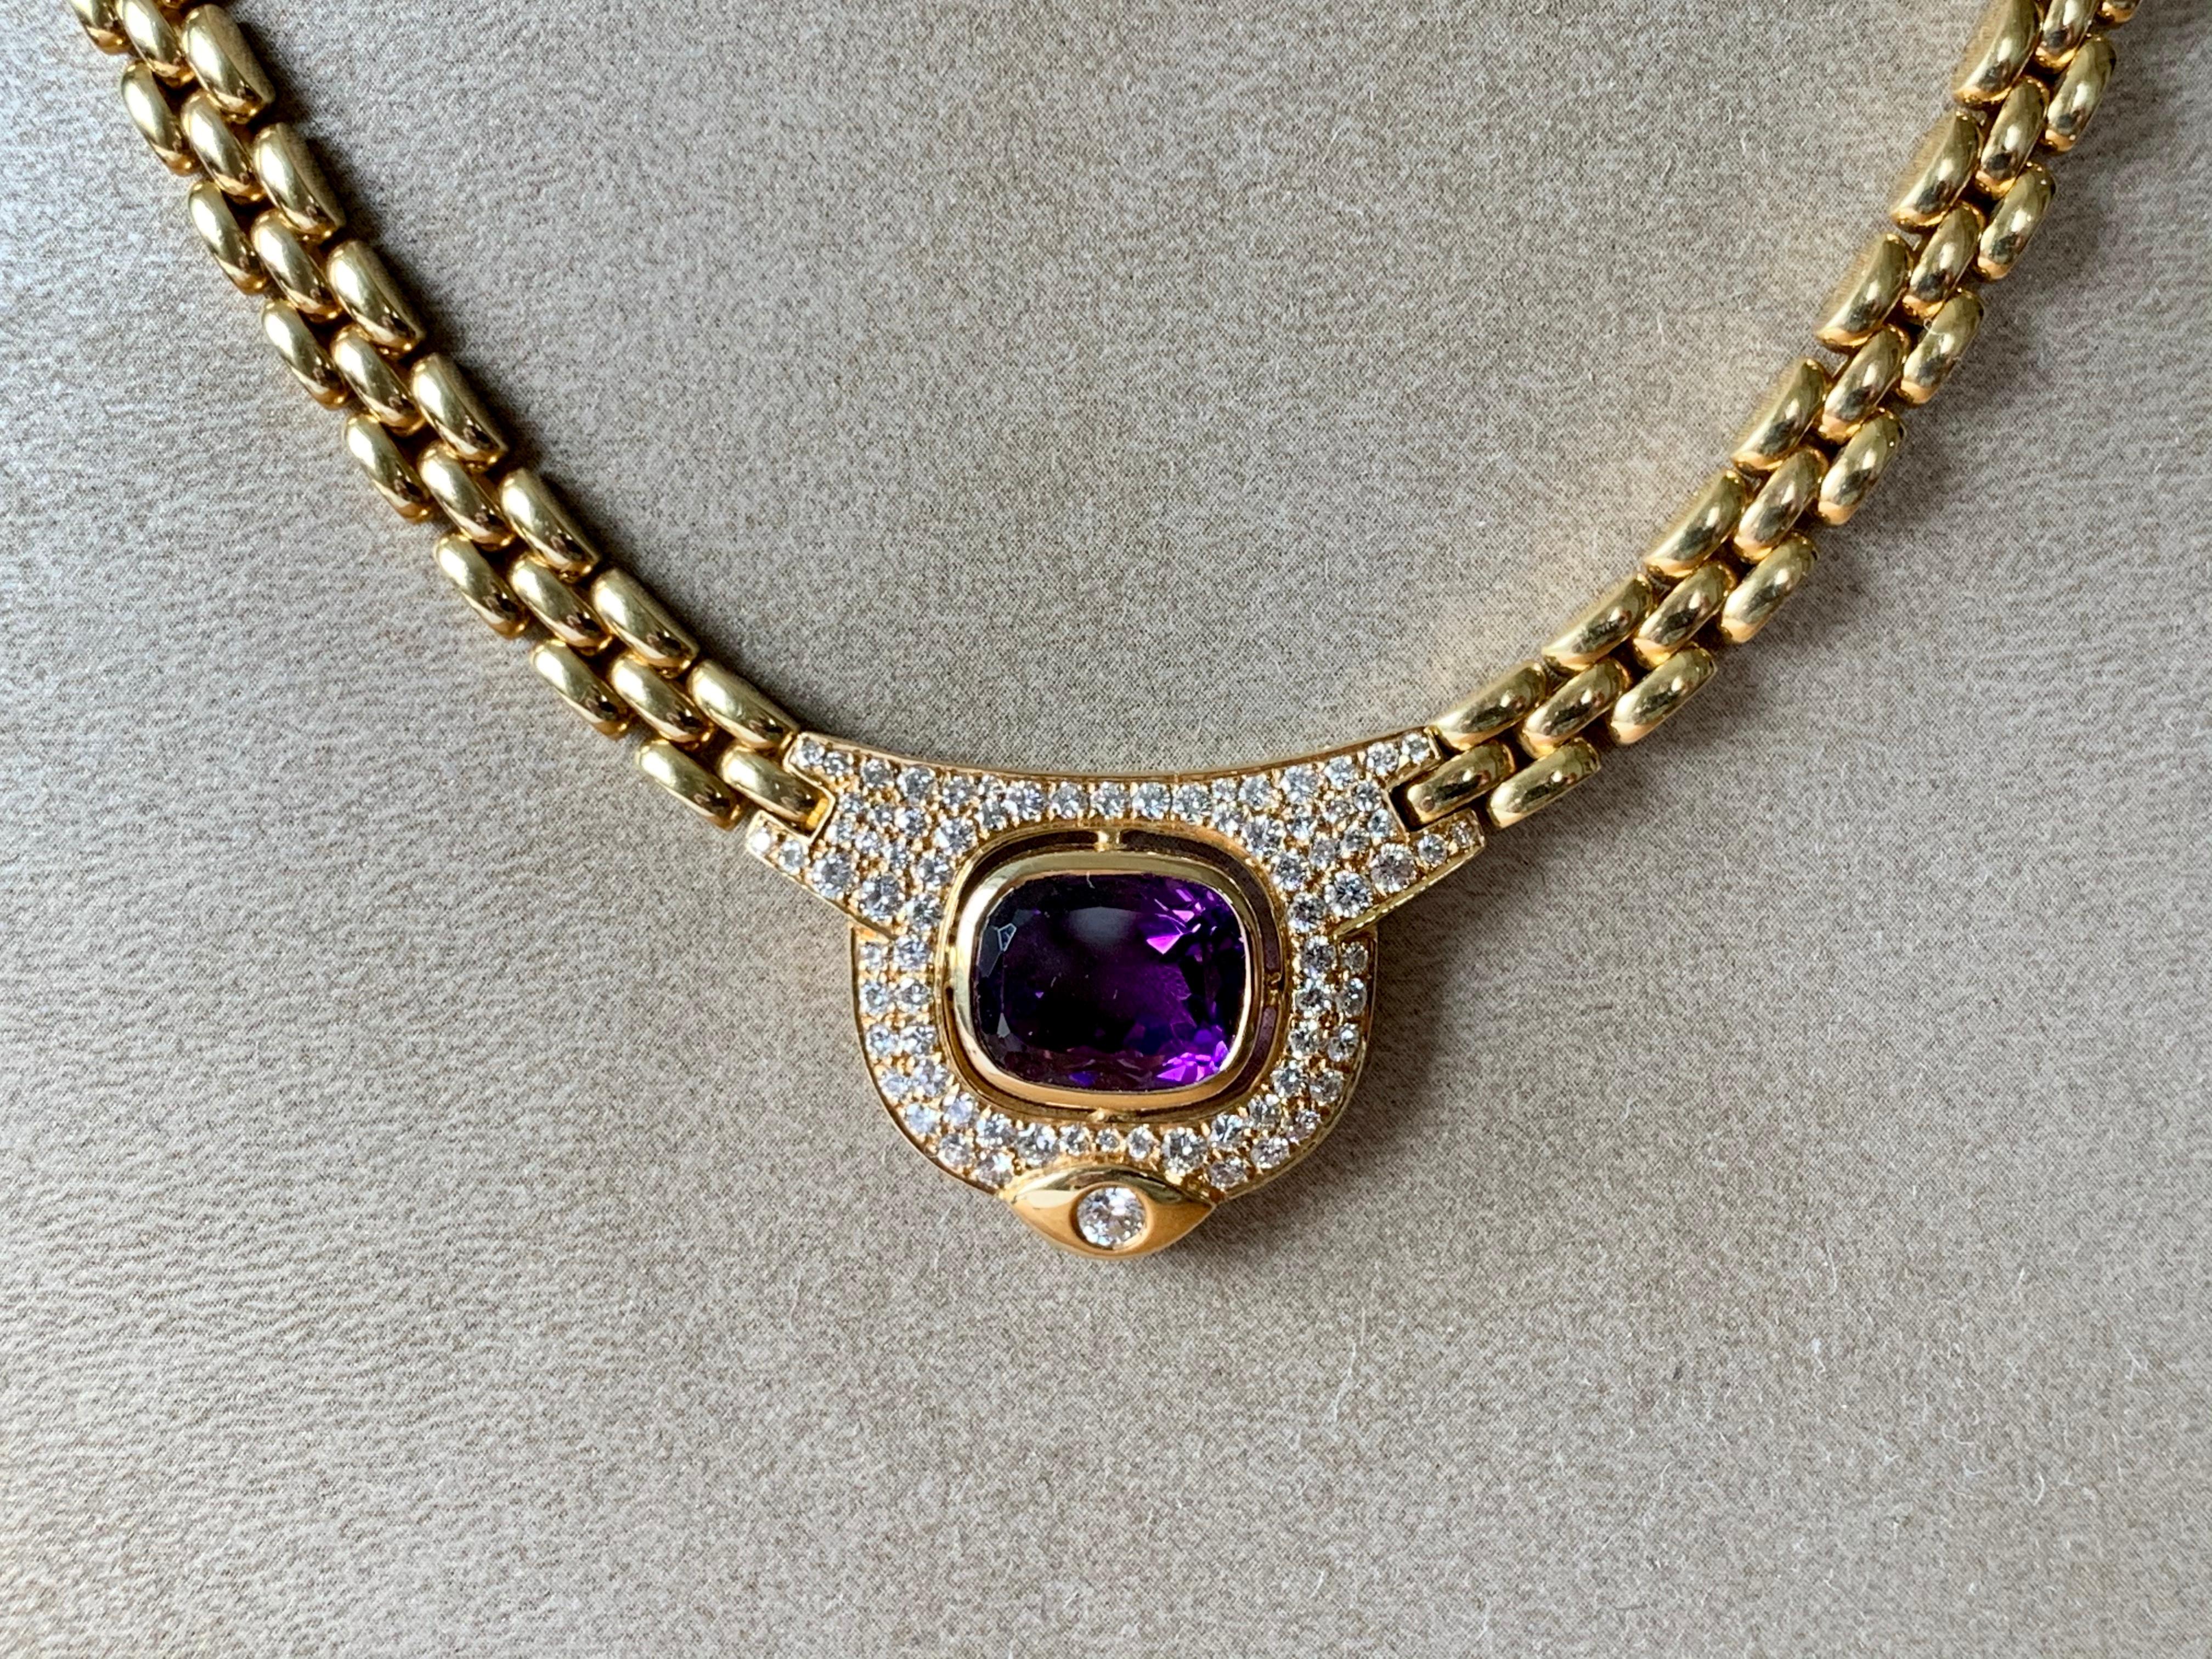 A solid  18 K yellow Gold link chain necklace by Kurz Zurich with a pendant featuring an oval Amethyst with intense color weighing approximately 5 ct and 81  brilliant cut Diamonds weighing 1.30 ct, G color, vs clarity. 
Length: 40 cm. 
Authenticity